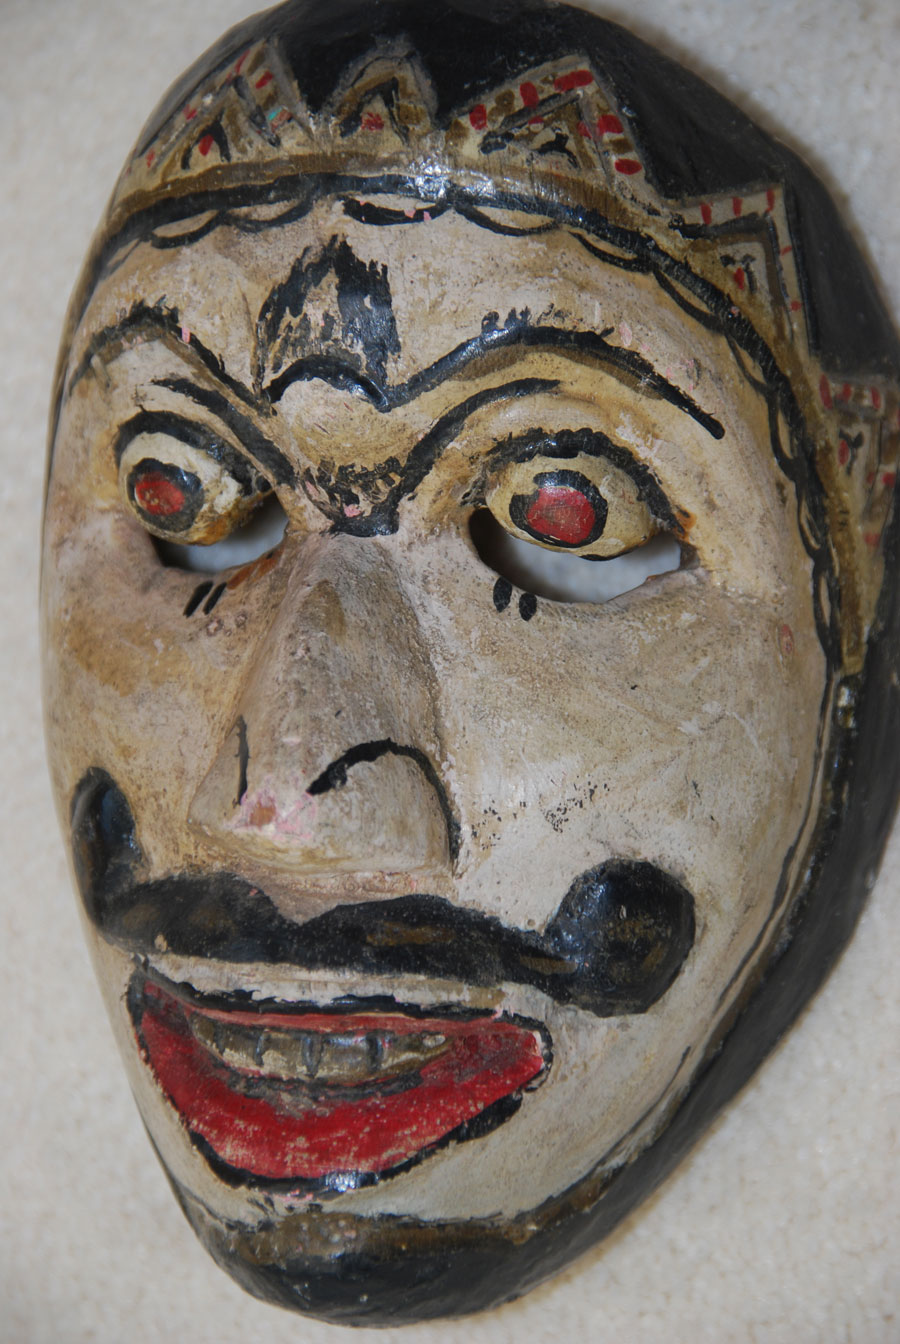 Village mask from Java